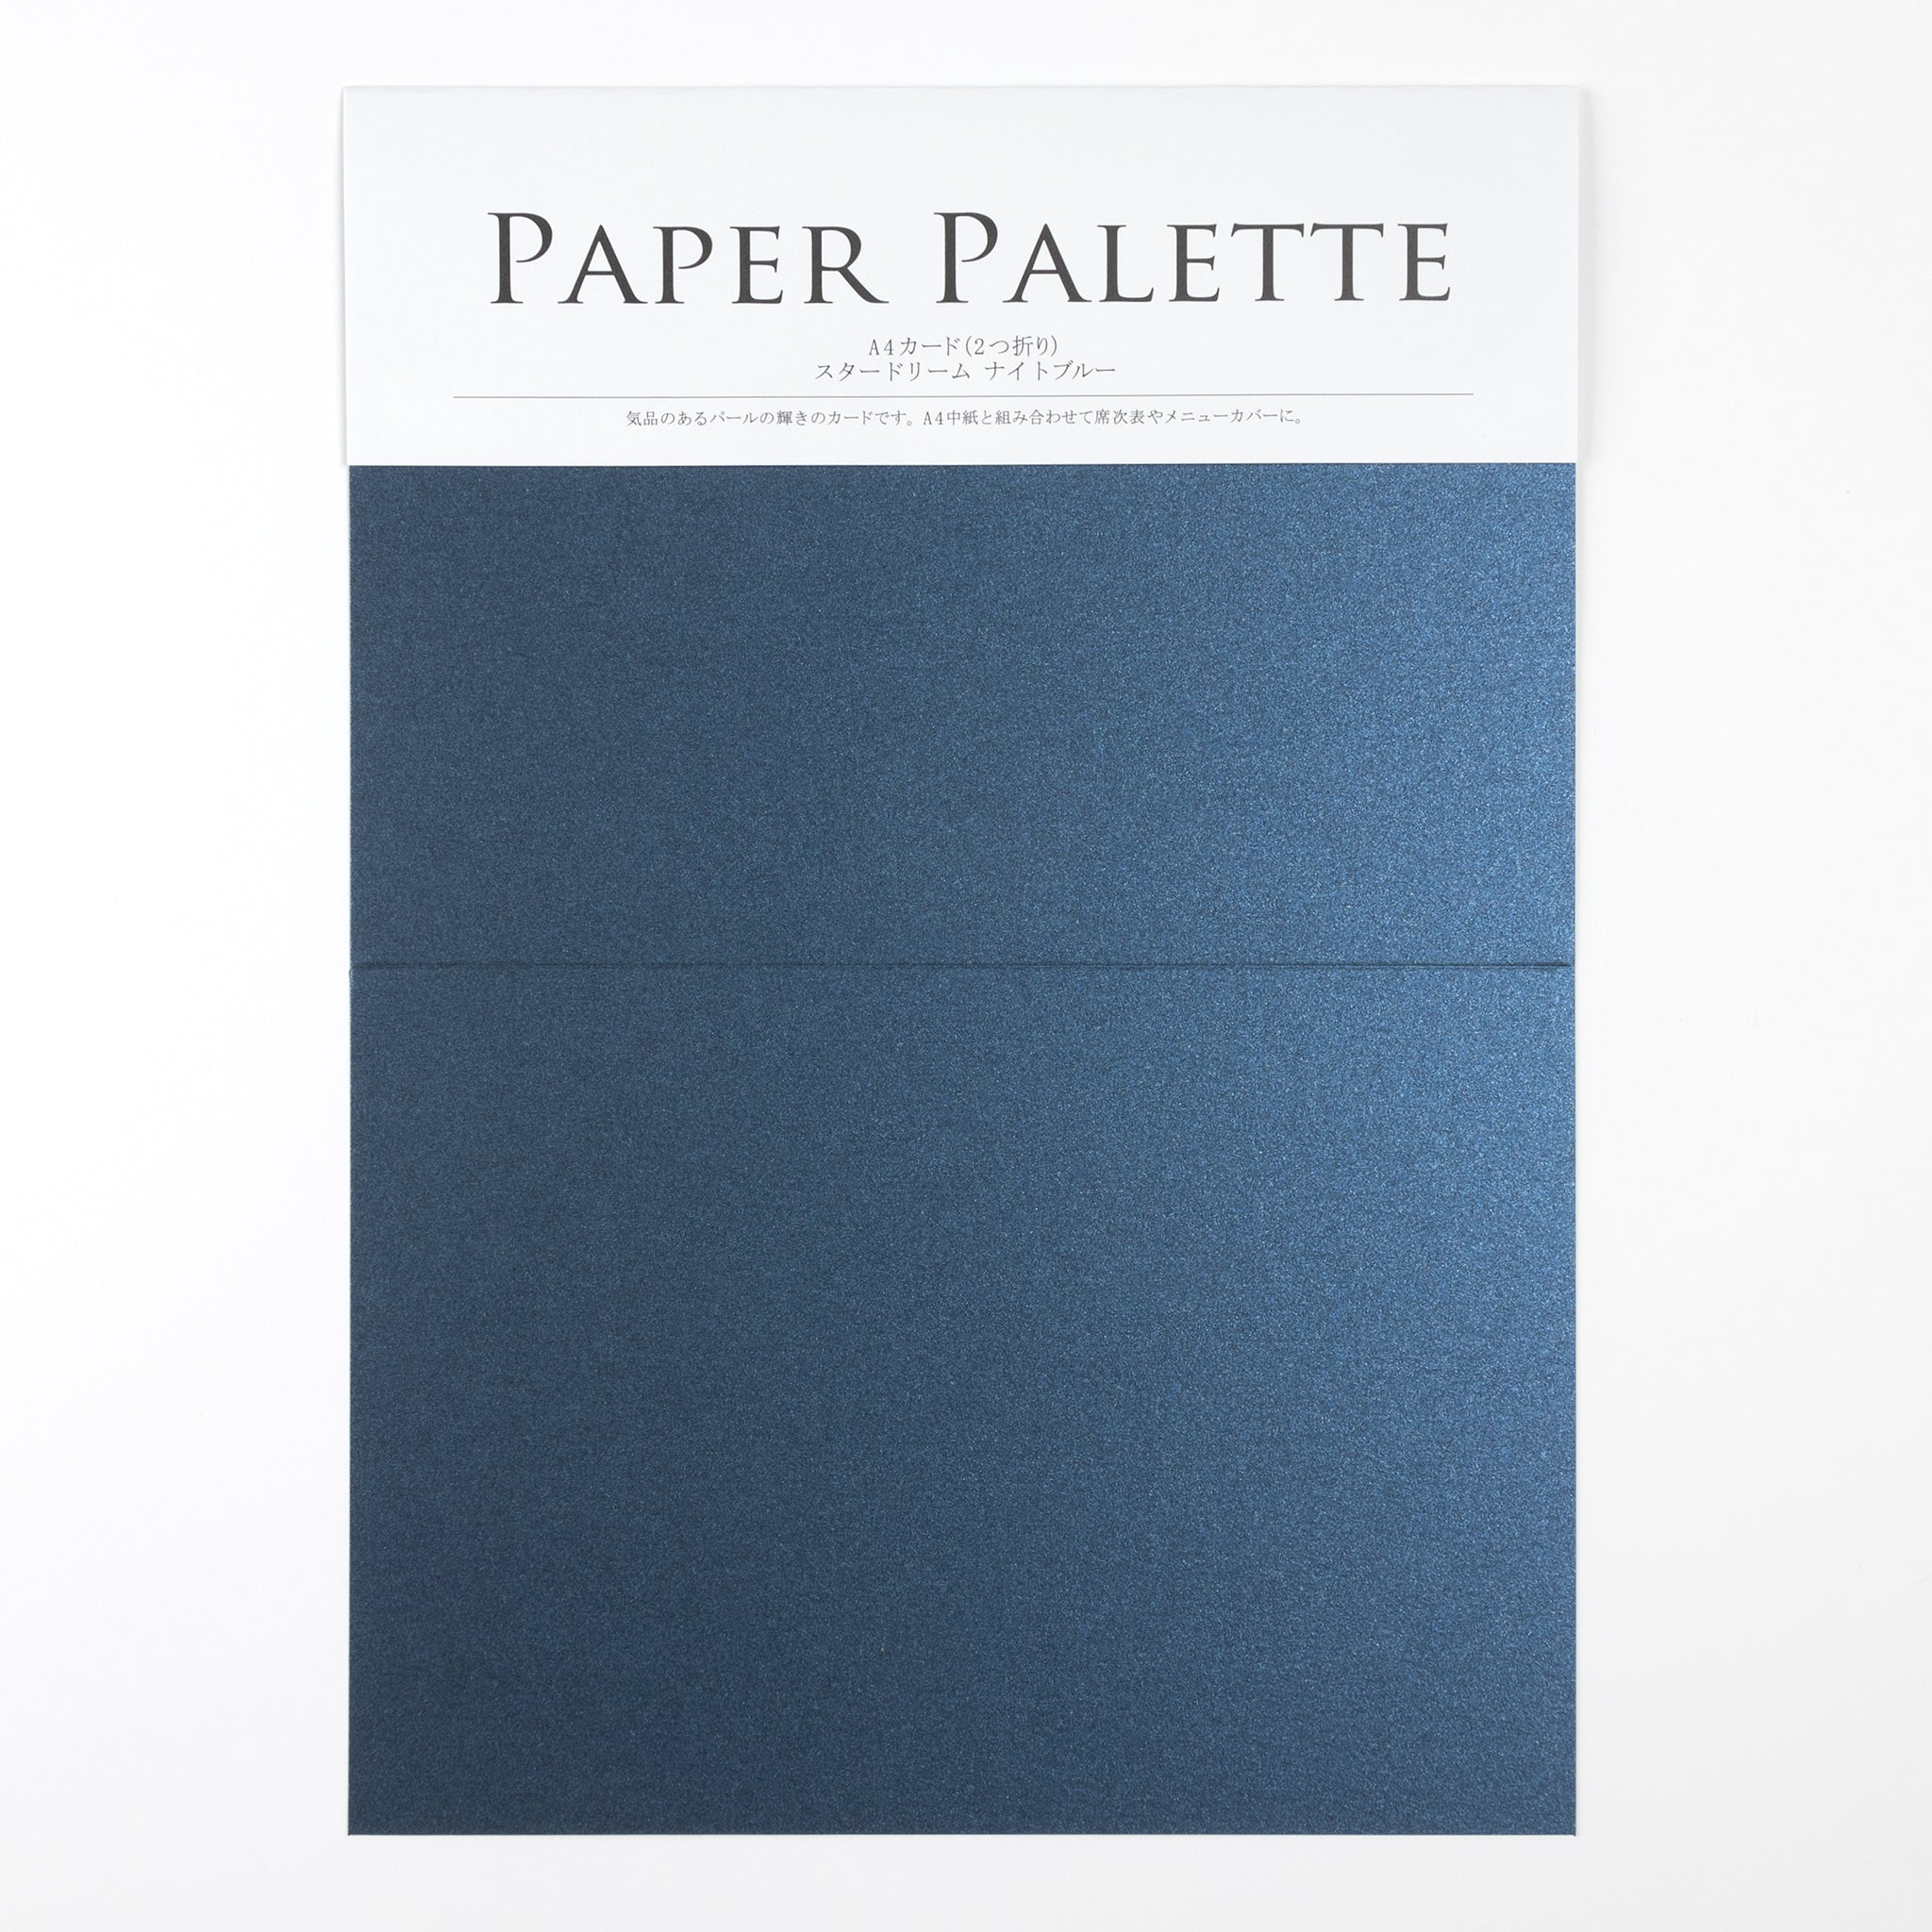 PAPER PALETTE A4 スタードリーム ナイトブルー | products.takeopaper.com